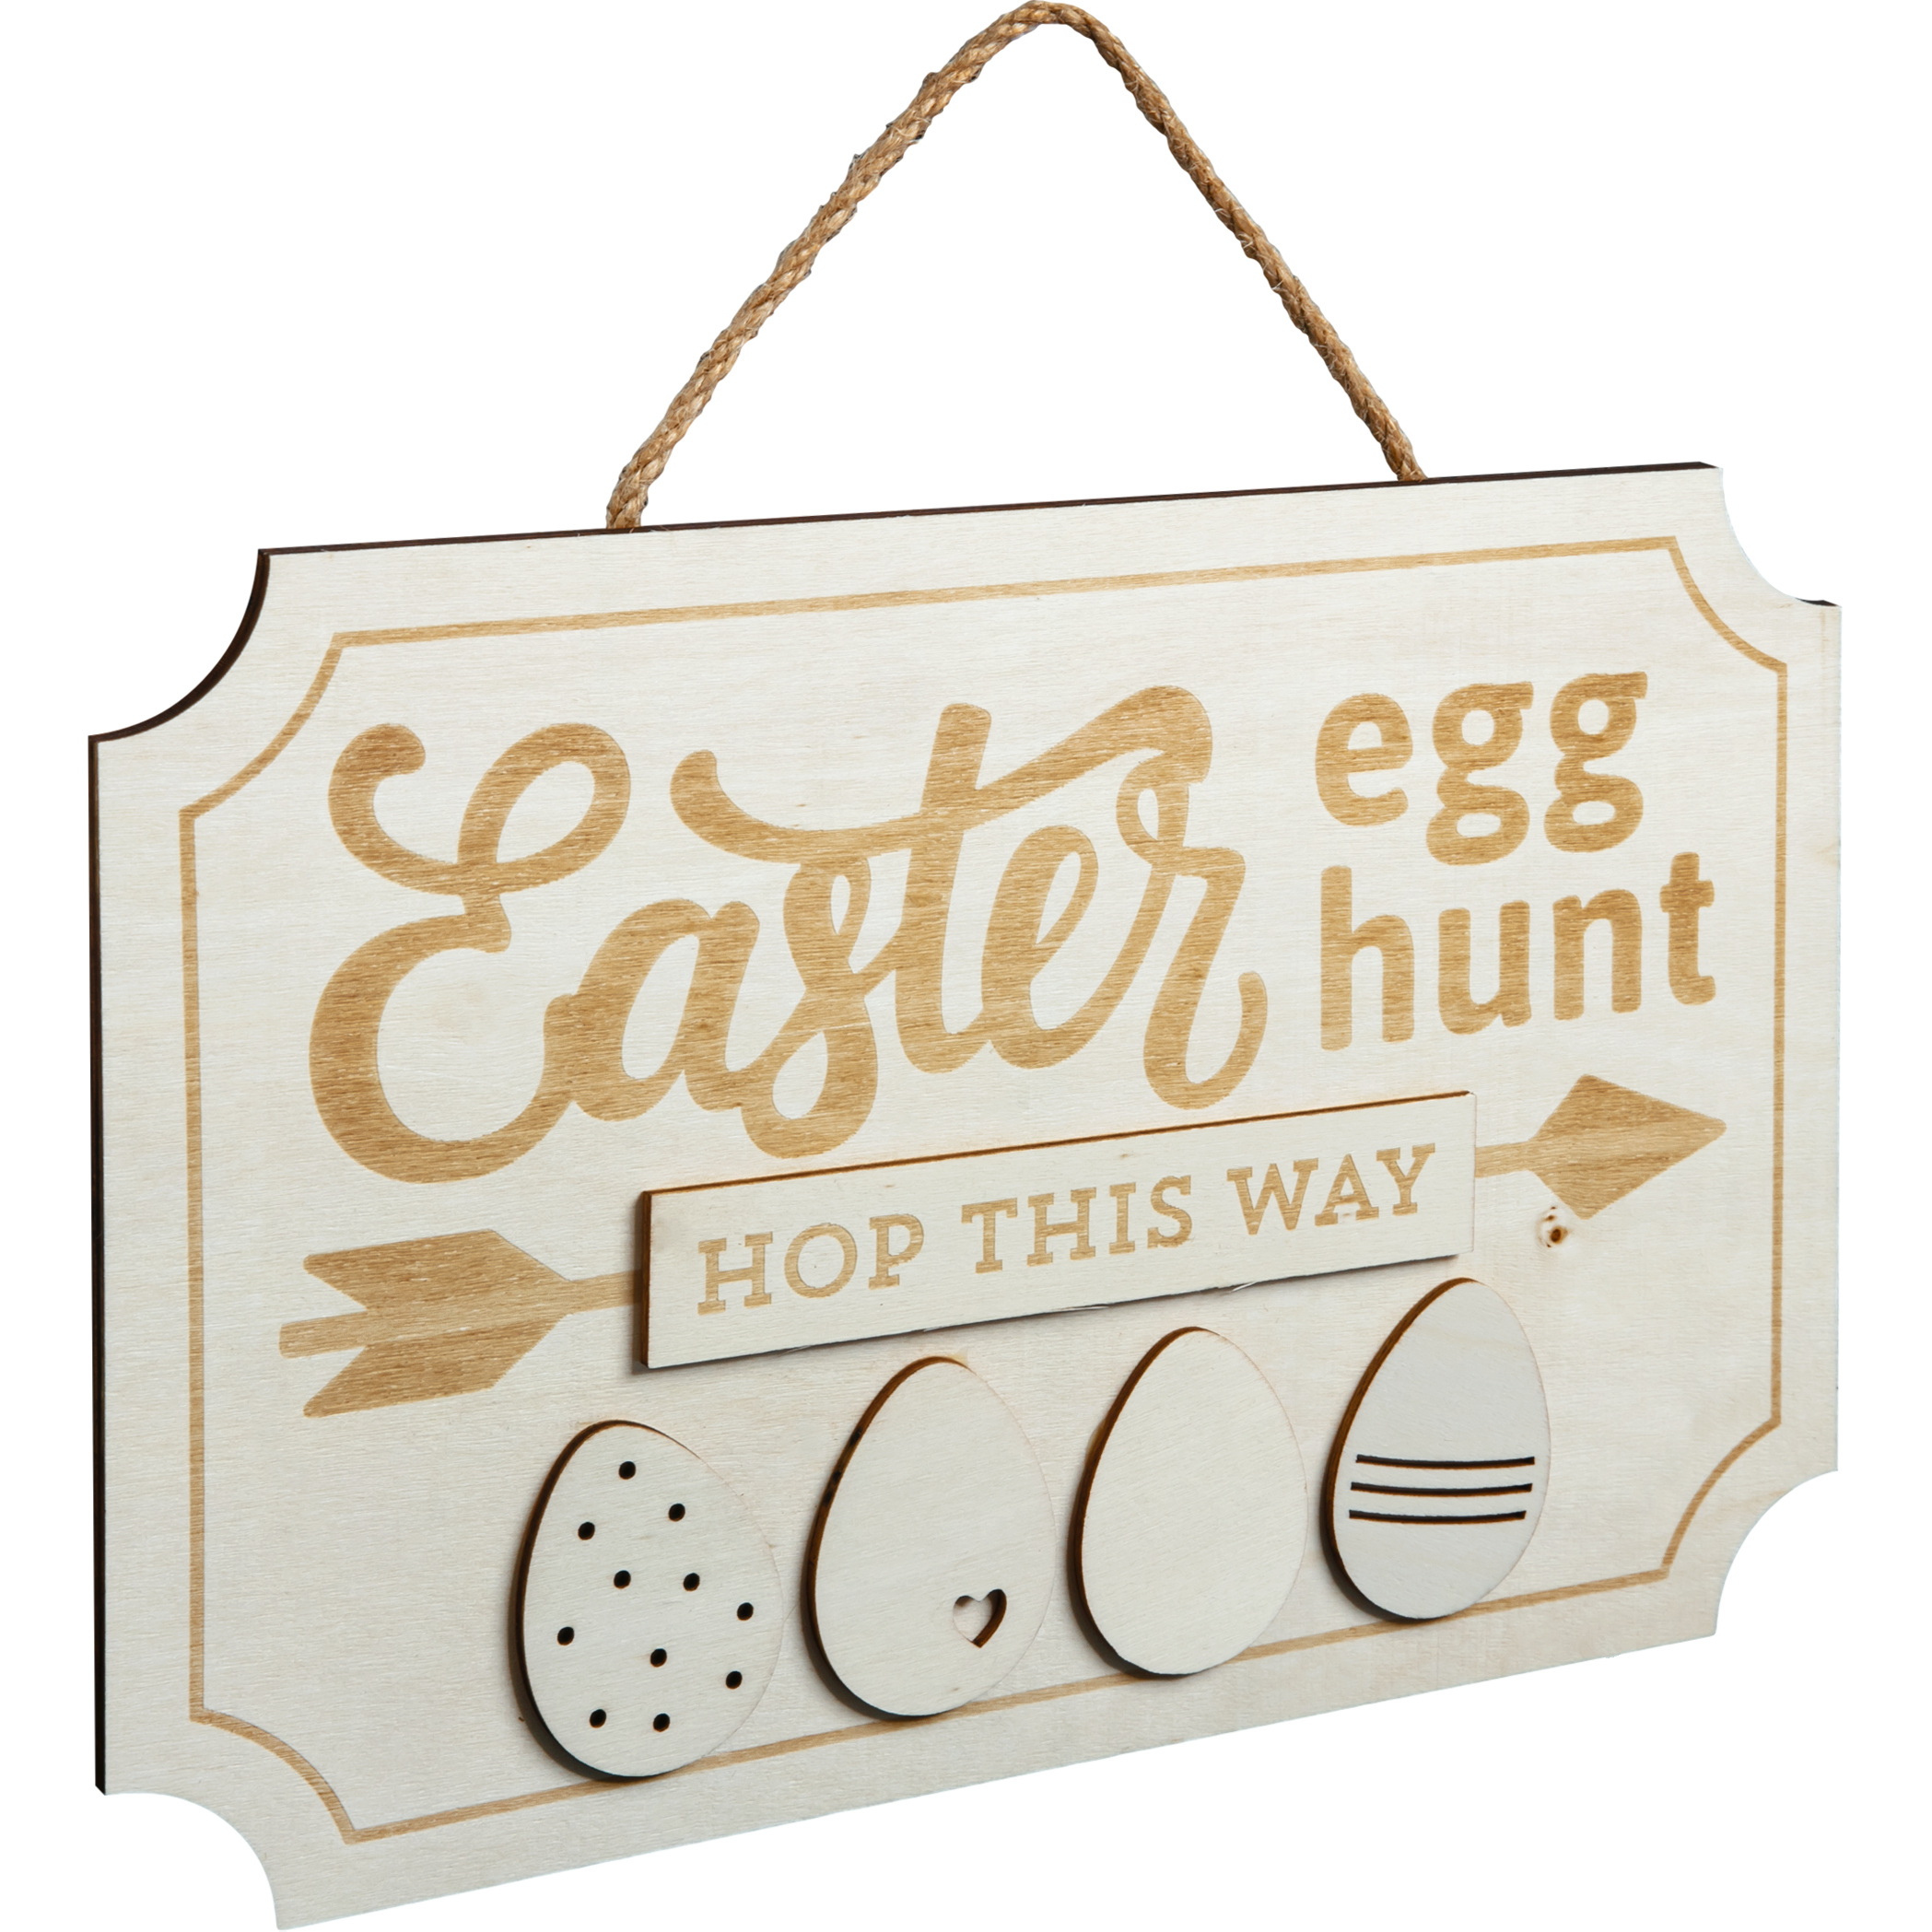 Image of Art Star Easter Plywood Egg Hunt Hop This Way Hanging Sign 29 x 19.3 x 0.7cm